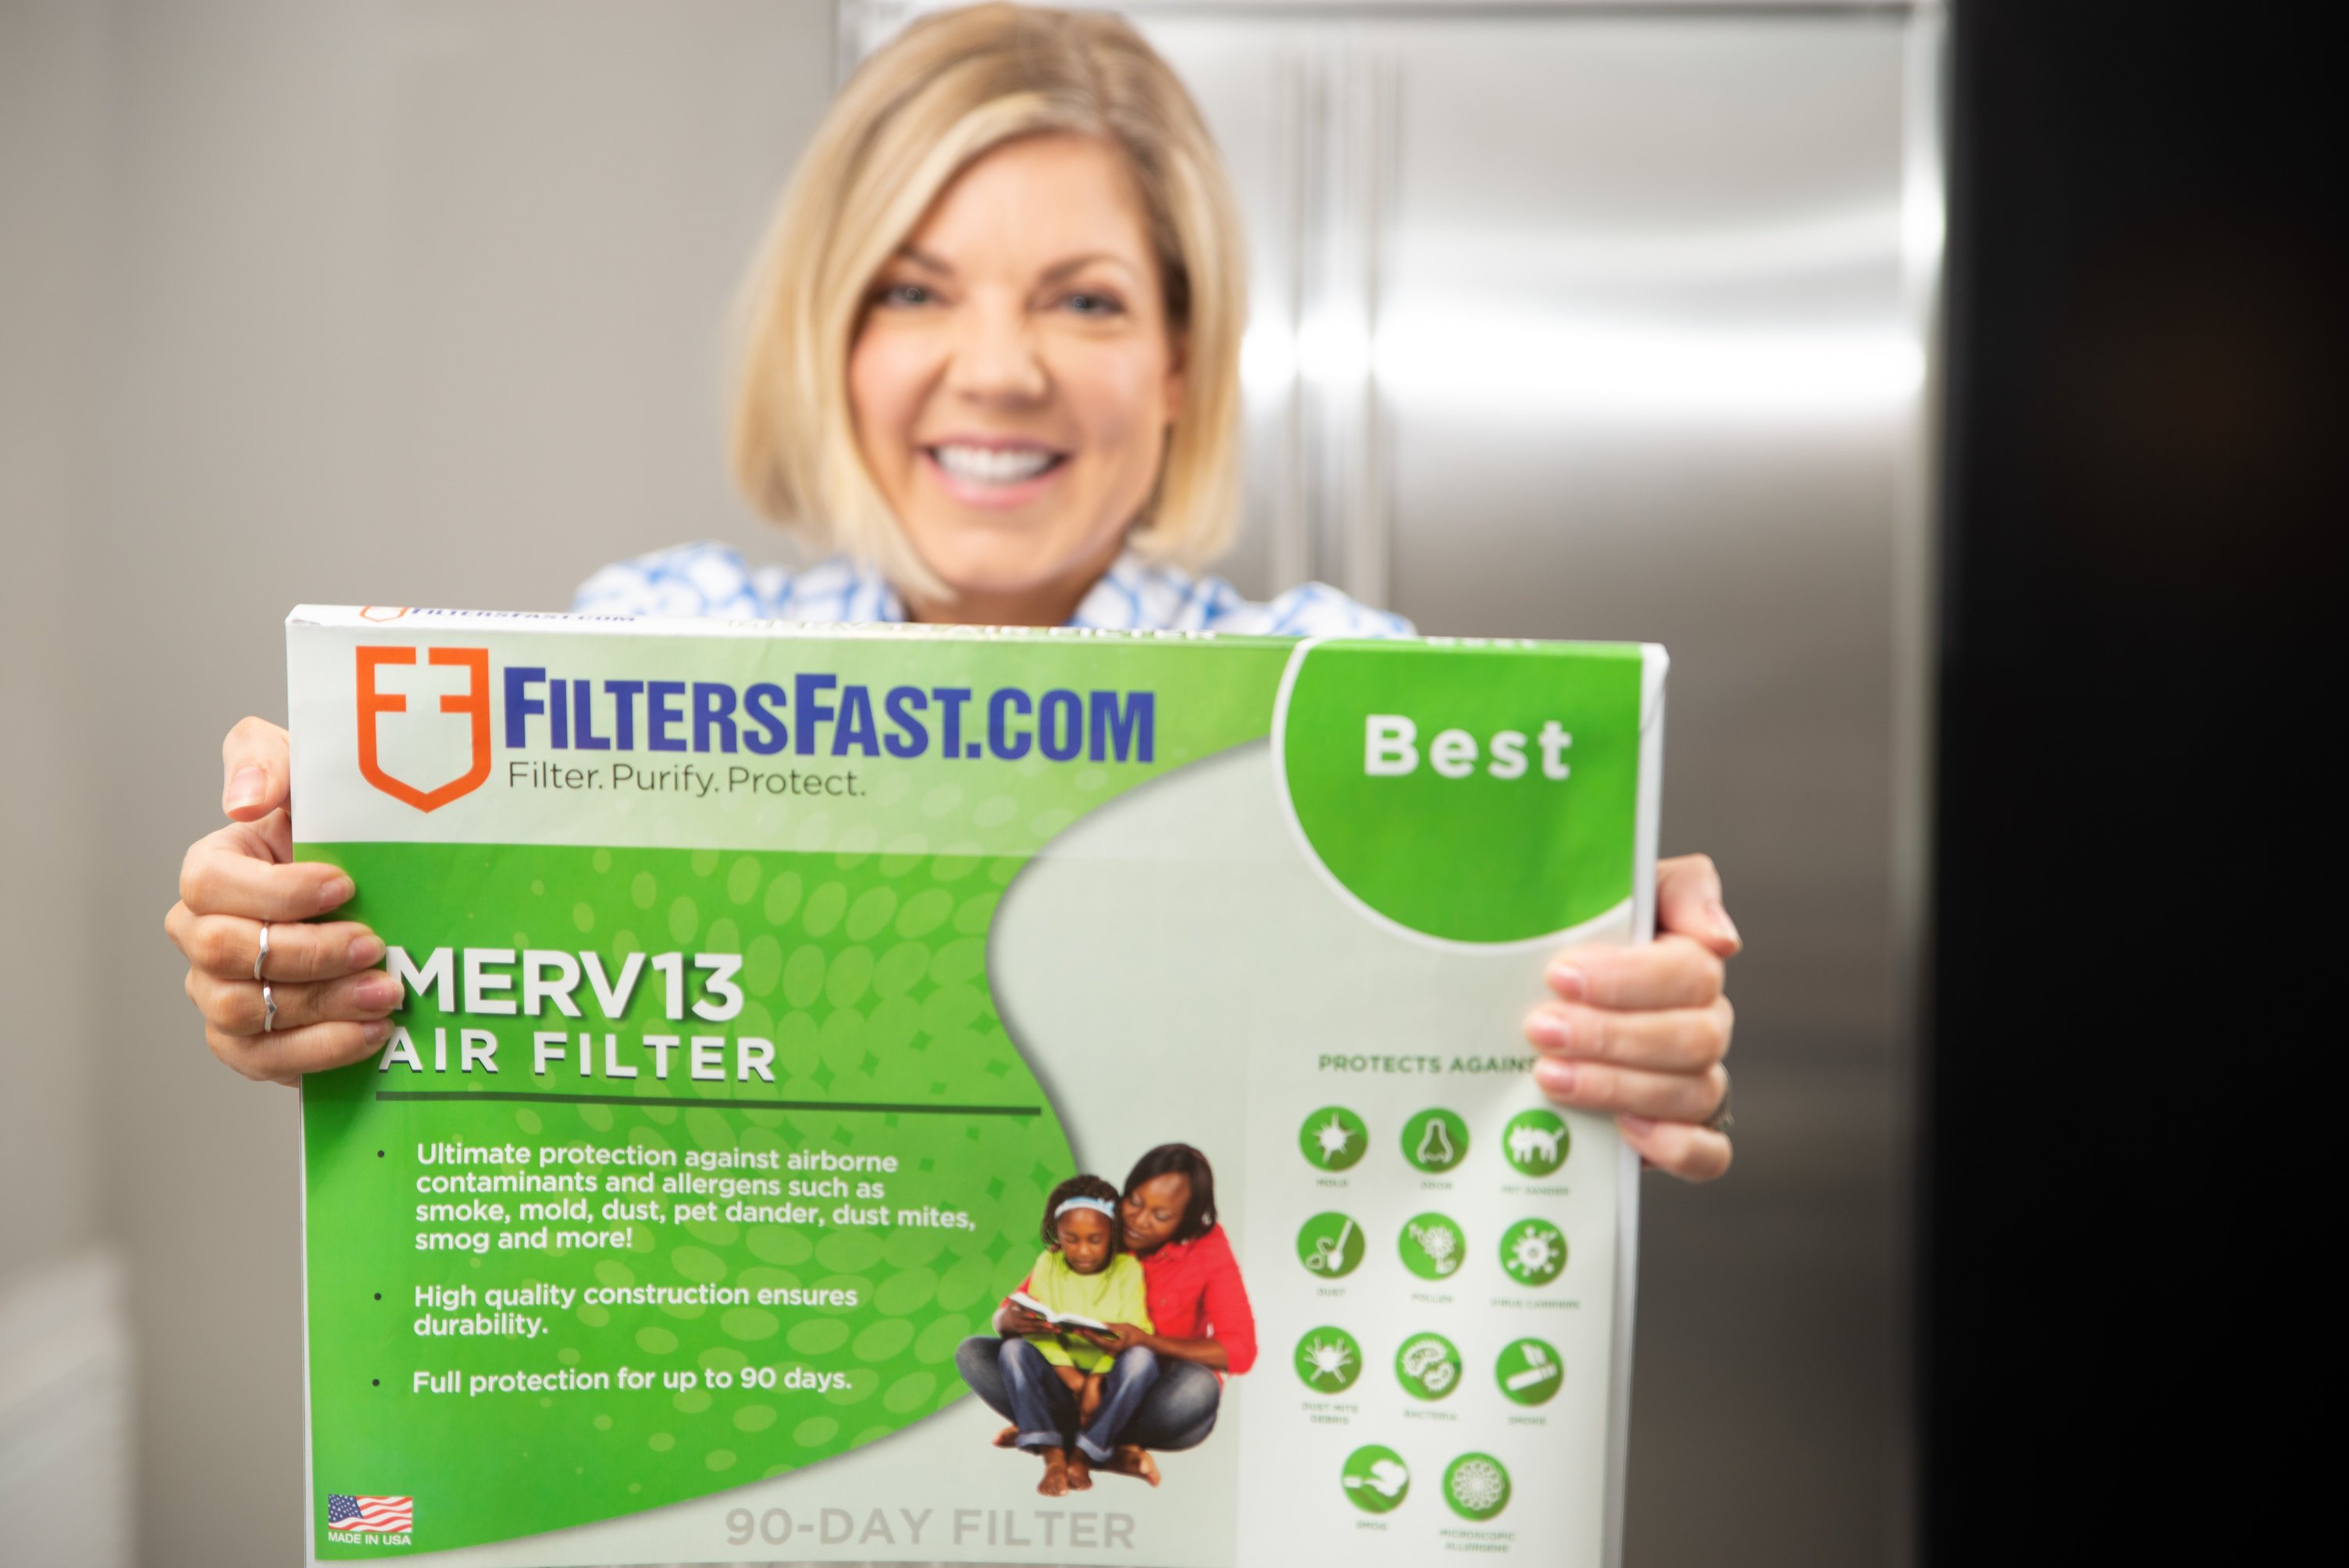 woman holding filtersfast brand air filter